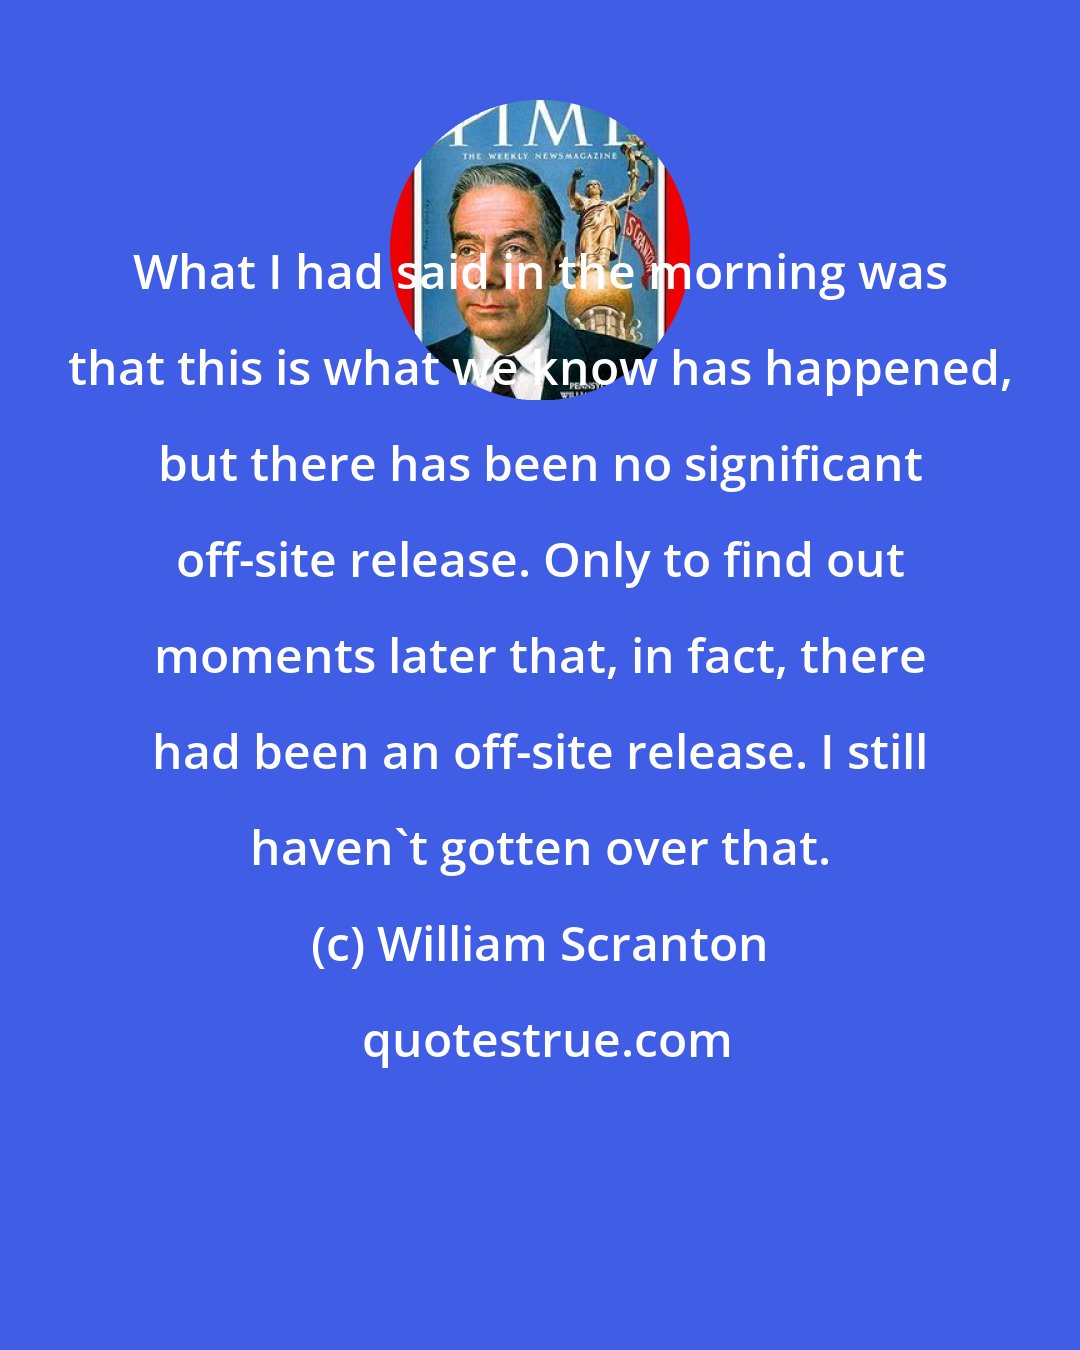 William Scranton: What I had said in the morning was that this is what we know has happened, but there has been no significant off-site release. Only to find out moments later that, in fact, there had been an off-site release. I still haven't gotten over that.